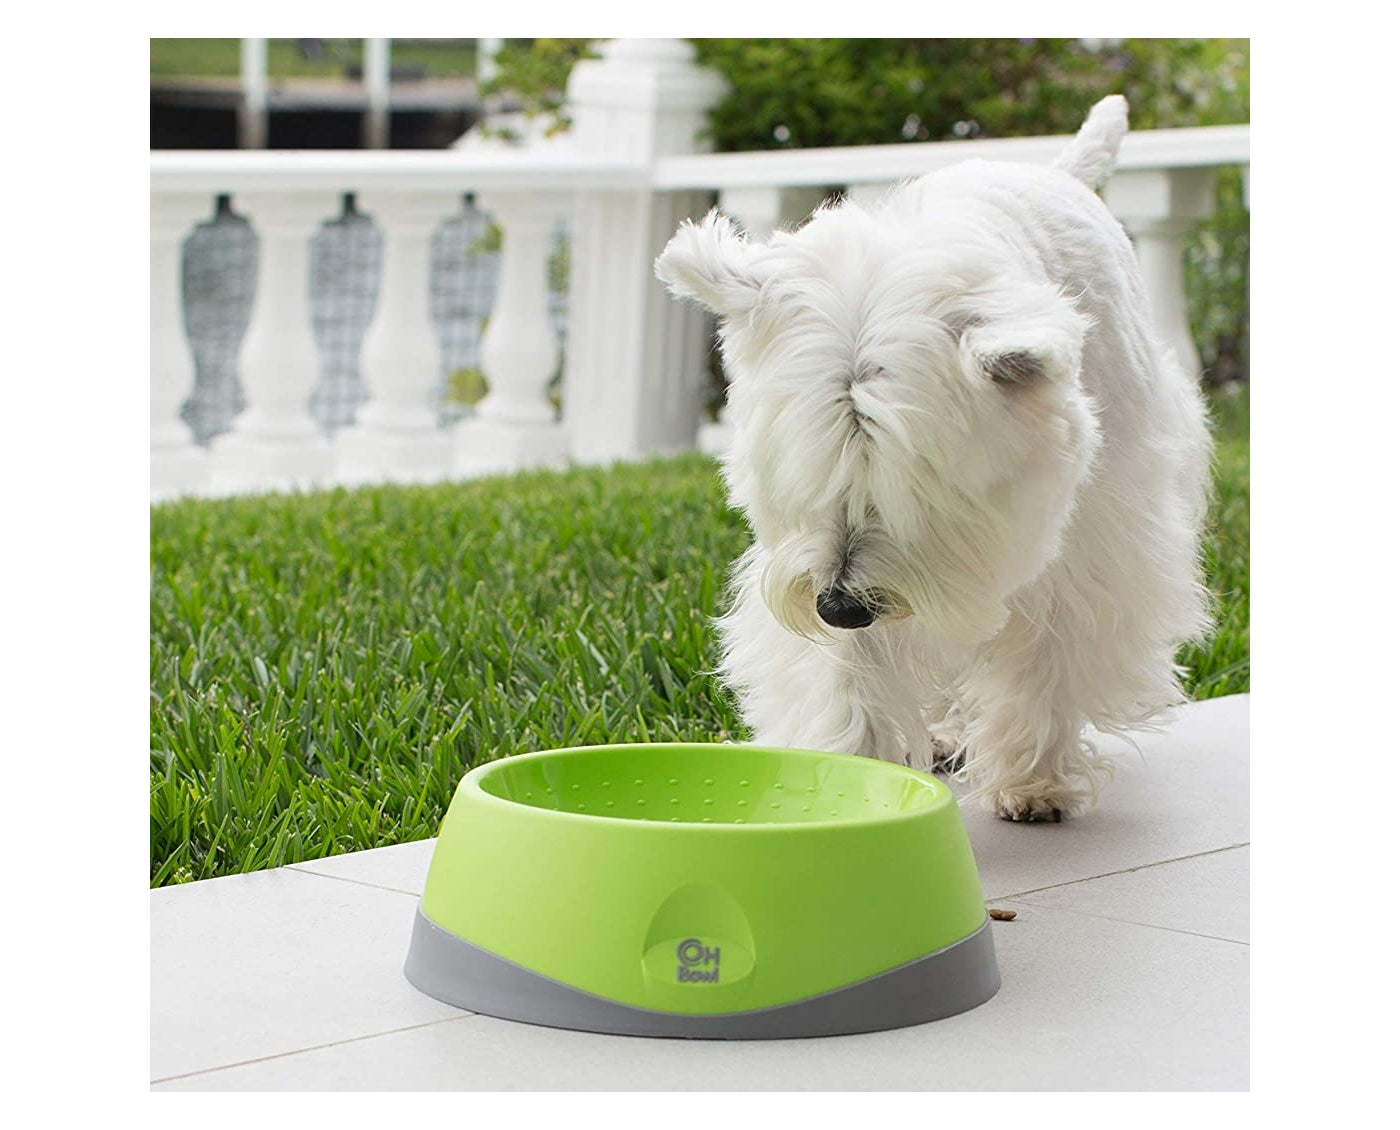 LickiMat - OH Bowl (Green) Small - Buy Online SPR Centre UK